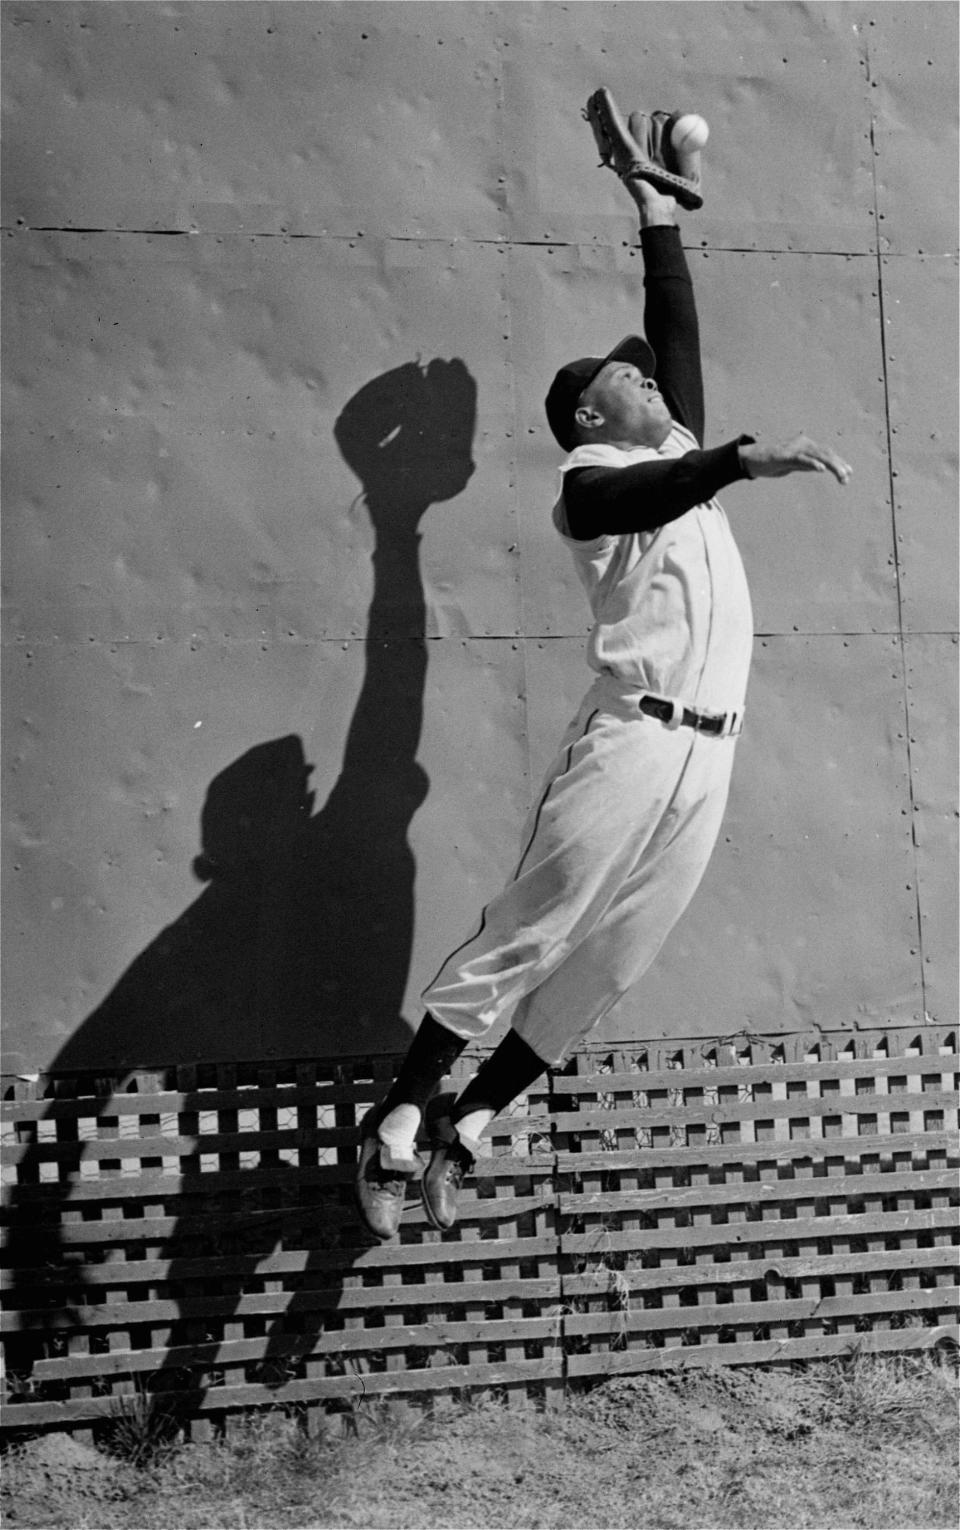 FILE - New York Giants center fielder Willie Mays leaps high to snare a ball near the outfield fence at the Giants' Phoenix spring training base, Feb. 29, 1956. Mays, the electrifying “Say Hey Kid” whose singular combination of talent, drive and exuberance made him one of baseball’s greatest and most beloved players, has died. He was 93. Mays' family and the San Francisco Giants jointly announced Tuesday night, June 18, 2024, he had “passed away peacefully” Tuesday afternoon surrounded by loved ones. (AP Photo, File)